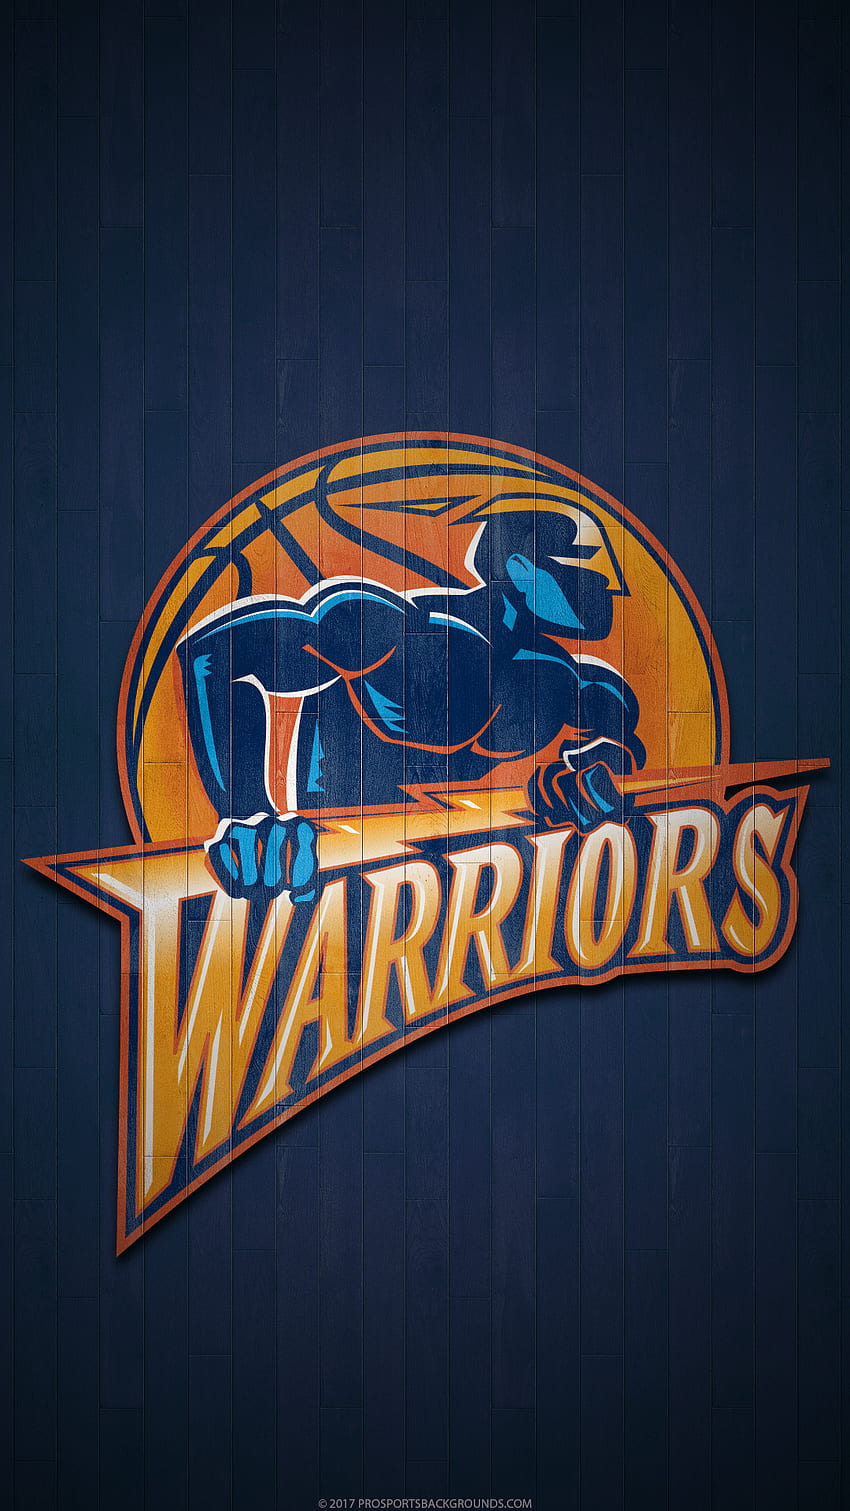 I made this iPhone wallpaper based on the Golden State warriors logo, which  looks a bit like a smash ball, with Photoshop : r/smashbros